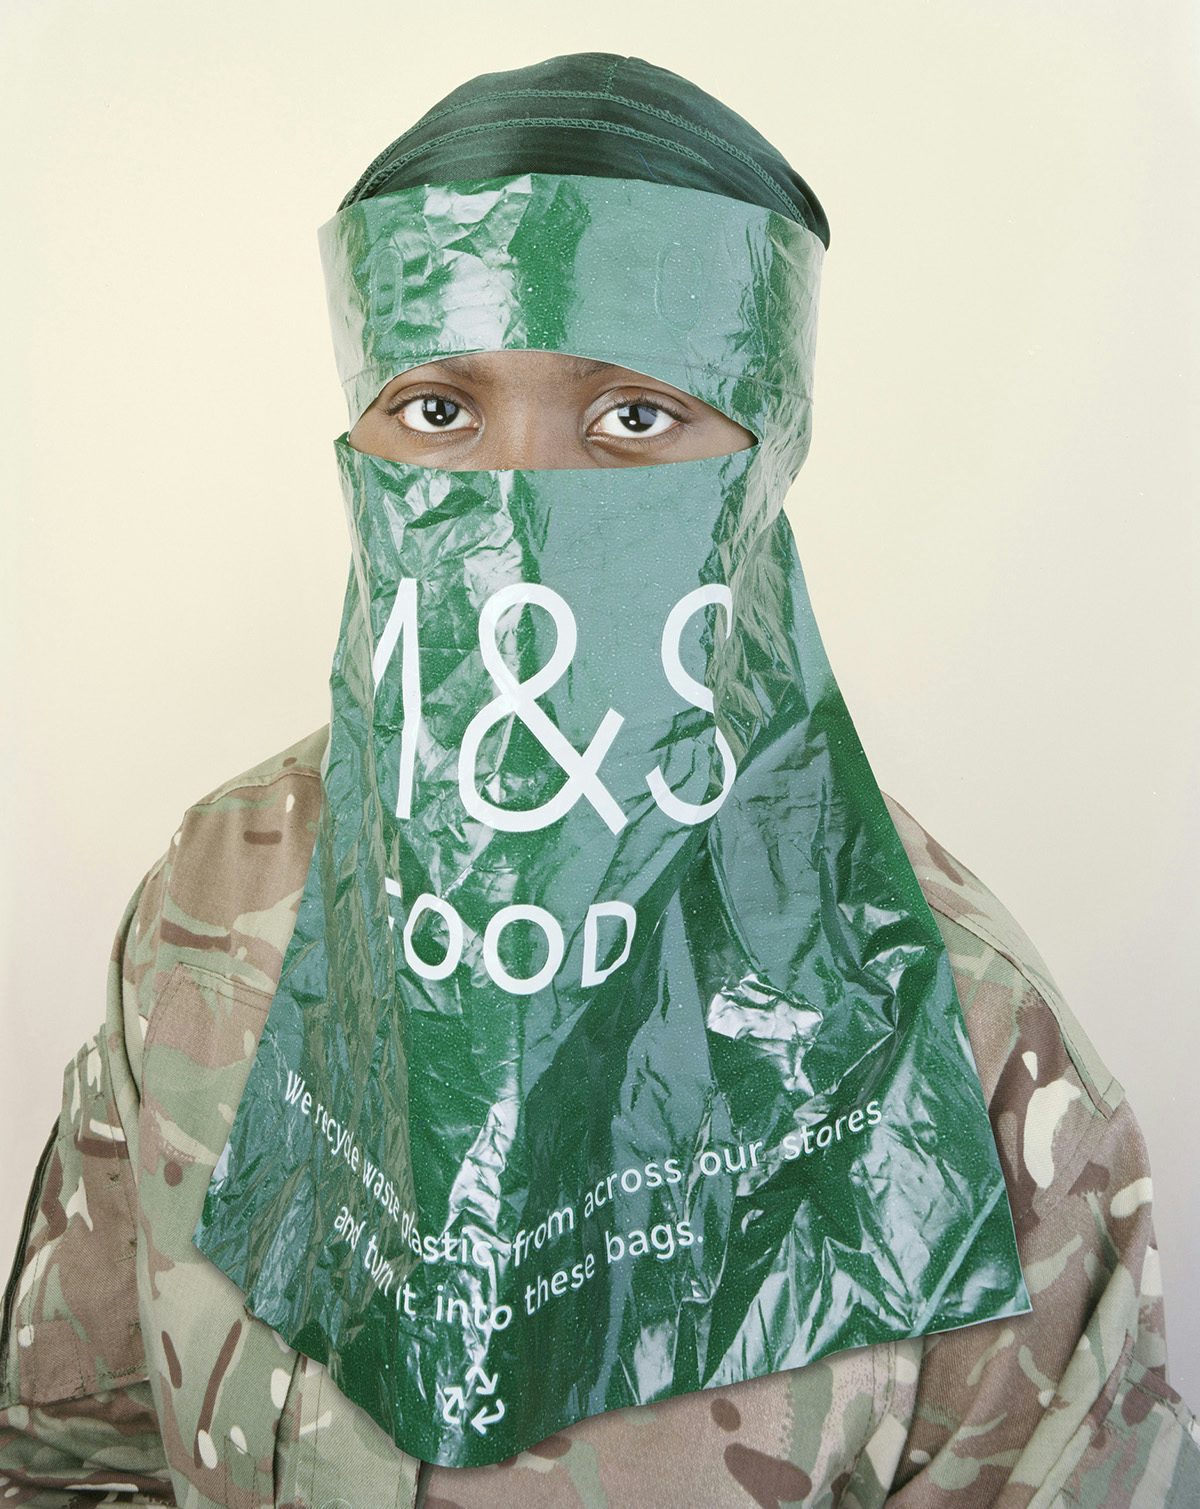 Photograph of a person wearing an M&S plastic bag over their face with space cut out for the eyes, part of the Sony World Photo Awards 2023